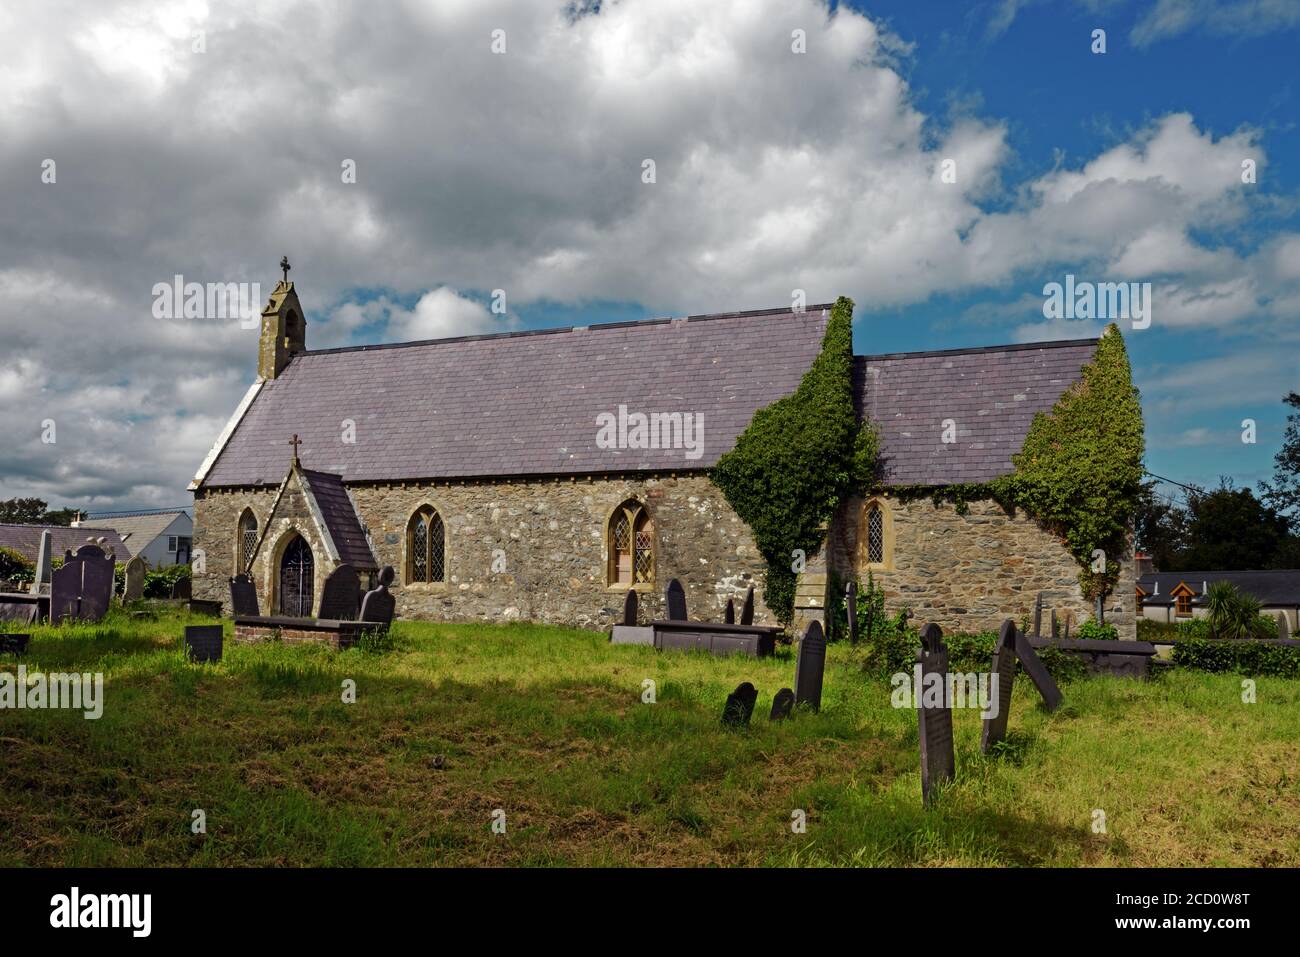 St Deiniol's Church, Llanddaniel Fab, Anglesey, is a 19th-century parish church but no longer used for worship. It is a Grade II listed building. Stock Photo